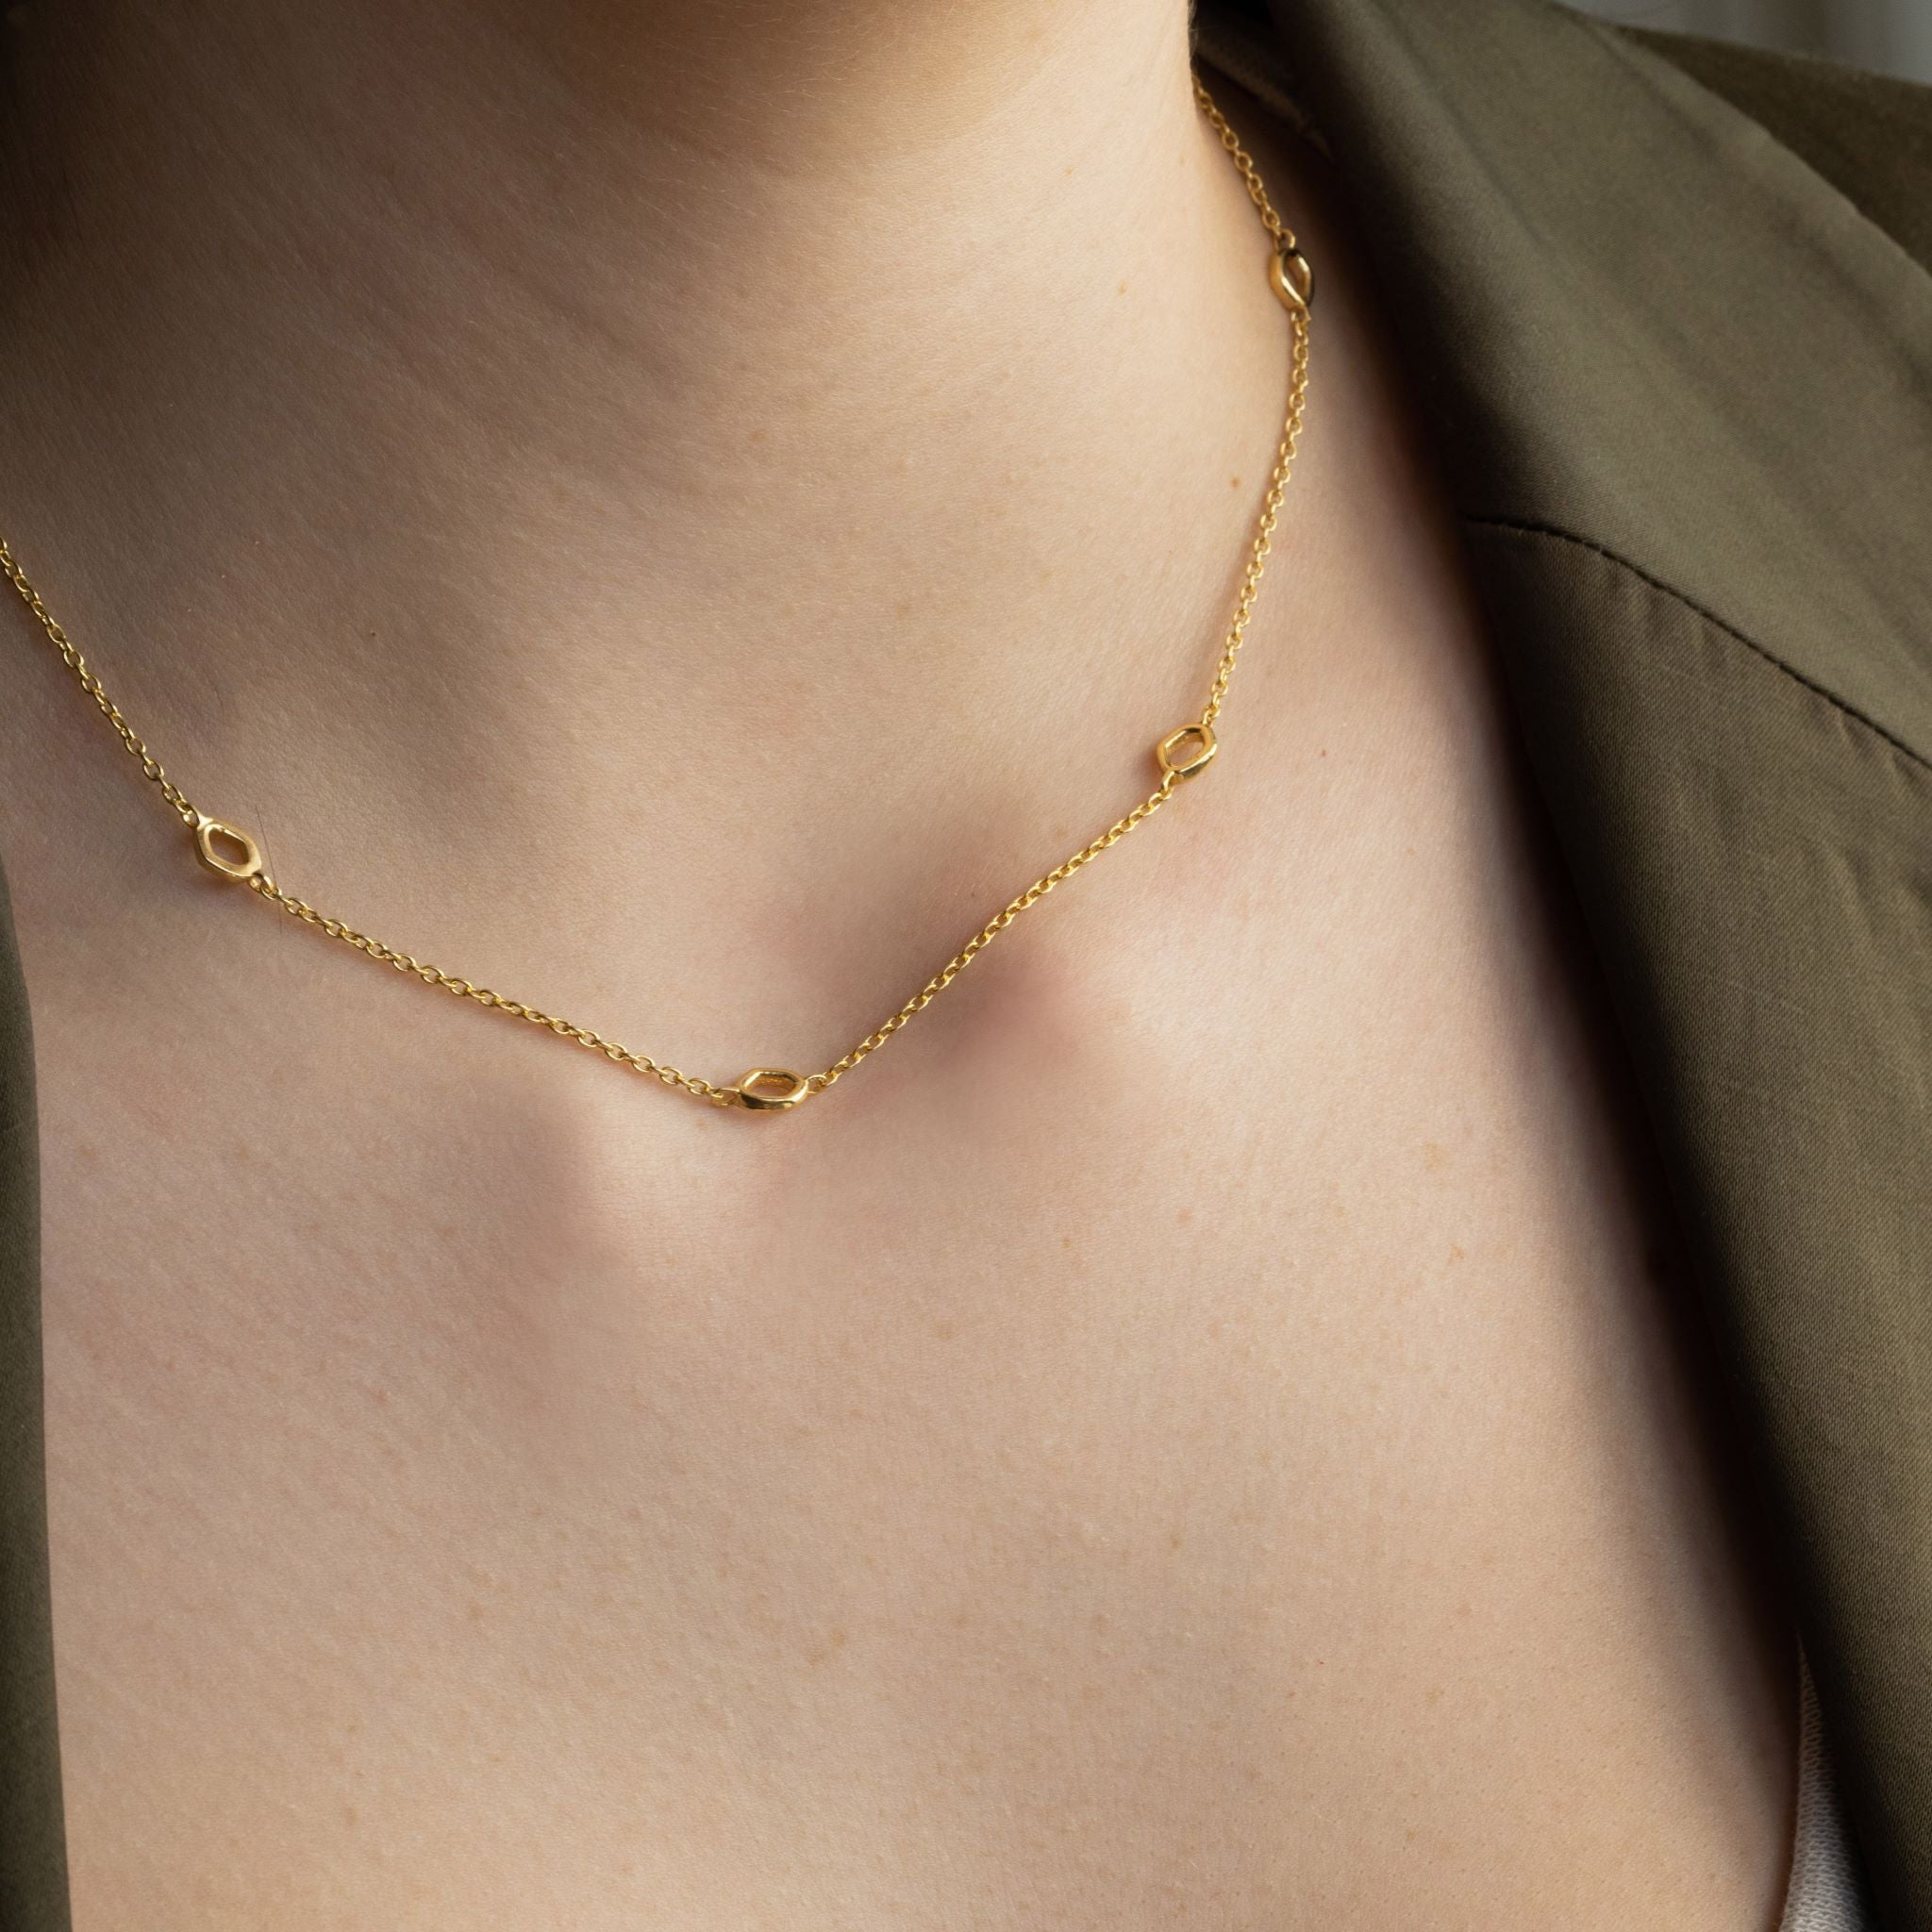 Dapple necklace is inspired by gentle evening sunlight filtering through the trees and are crafted in sterling silver and 18ct gold vermeil